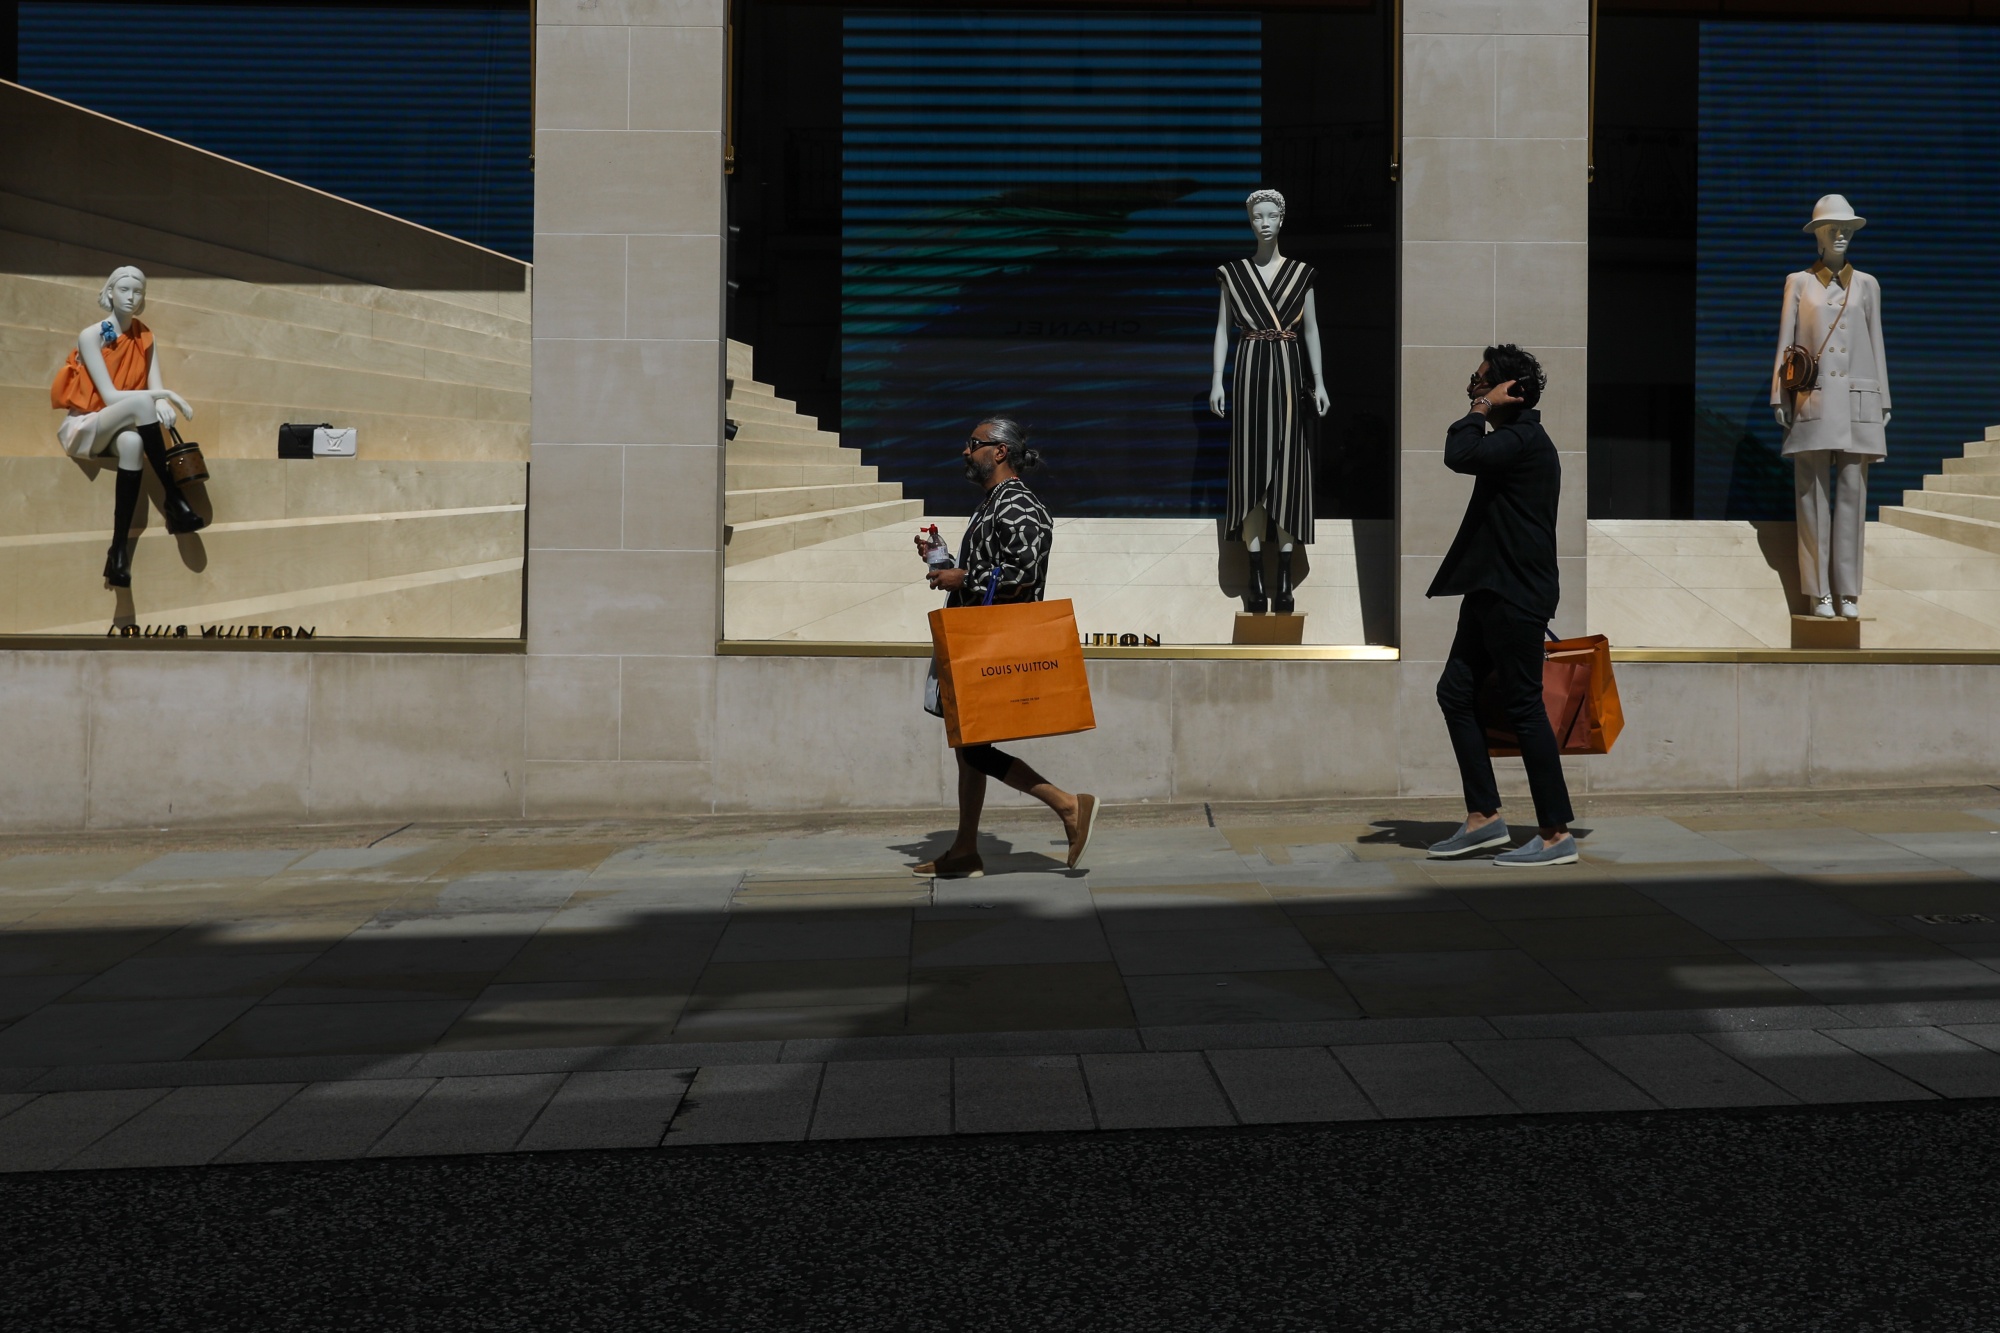 Louis Vuitton advertising in the City of London on 27th June 2022 in  News Photo - Getty Images